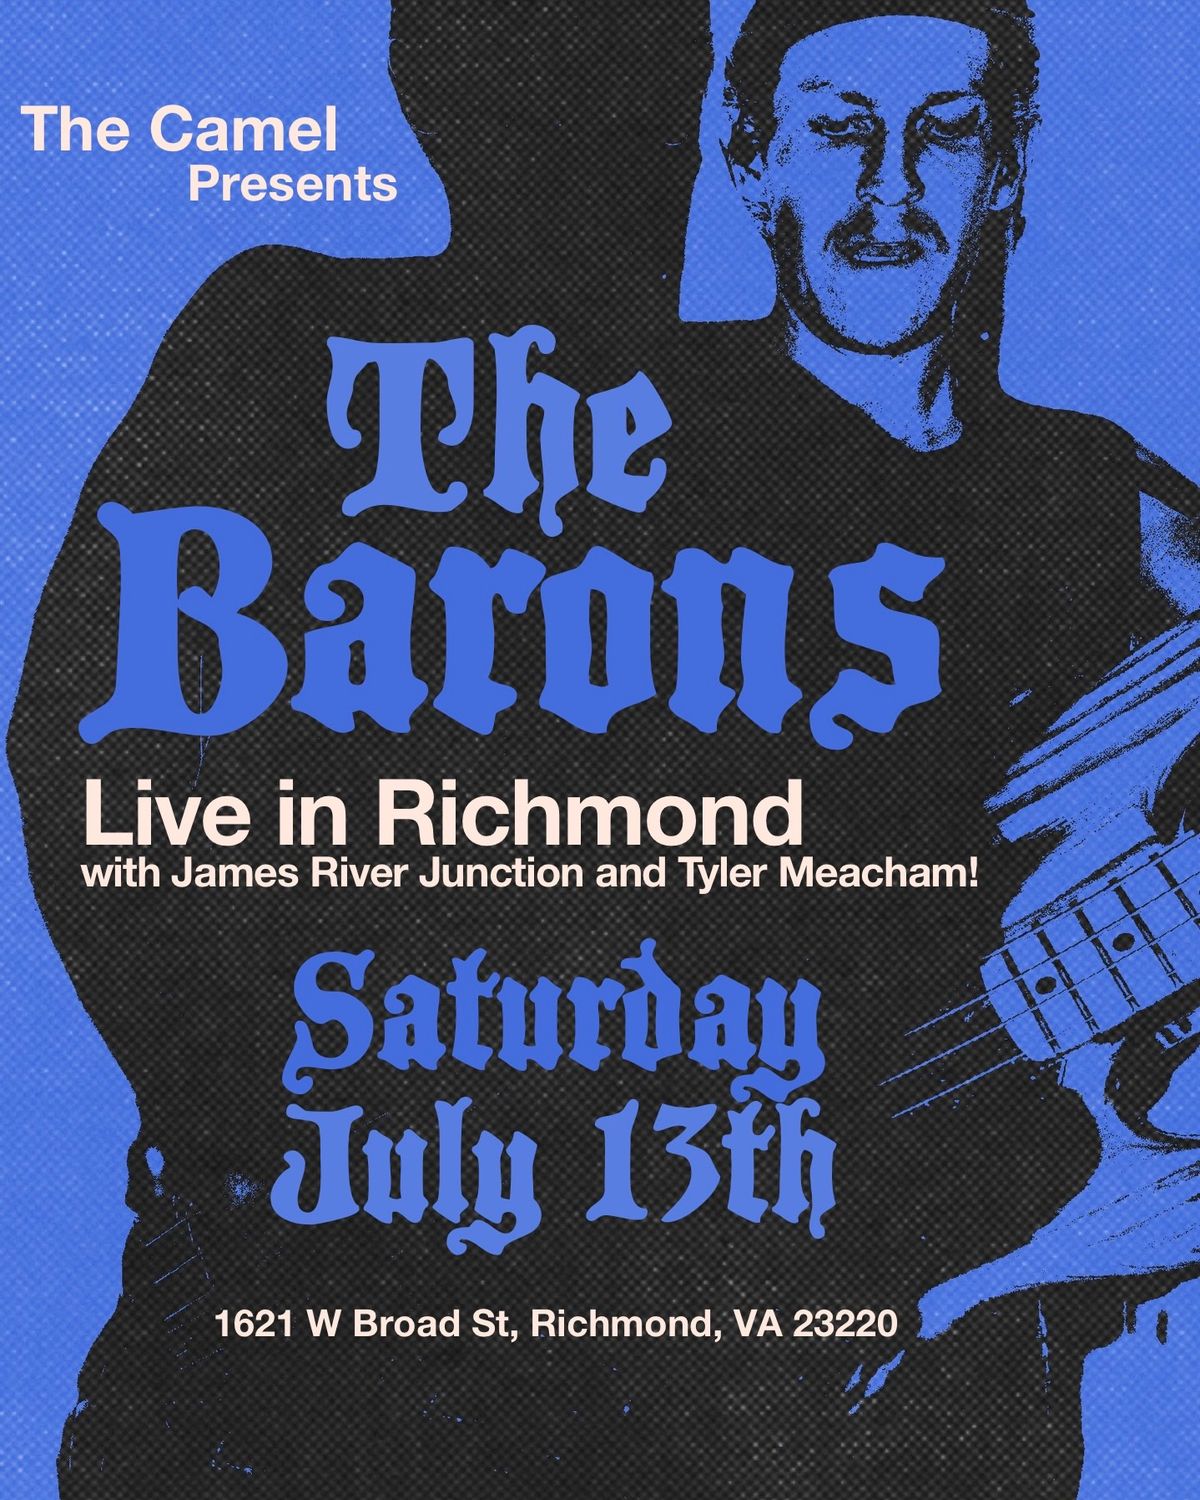 The Barons, James River Junction, Tyler Meacham at The Camel 